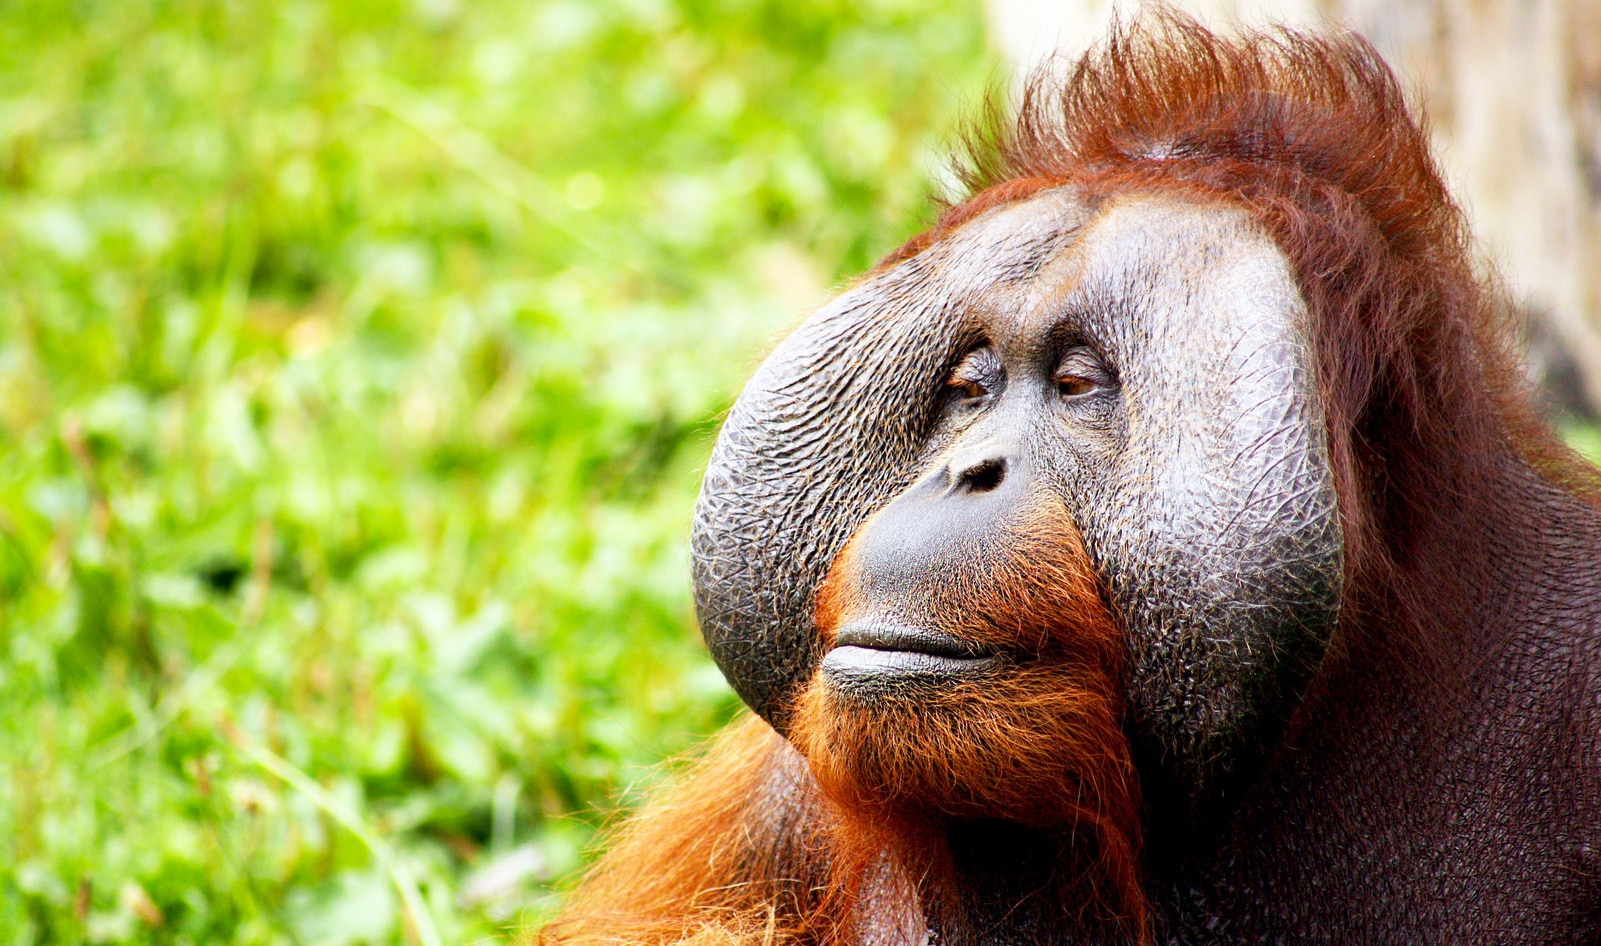 The Orangutan Project Demands End to Wildlife Trade to Stop Future Pandemics